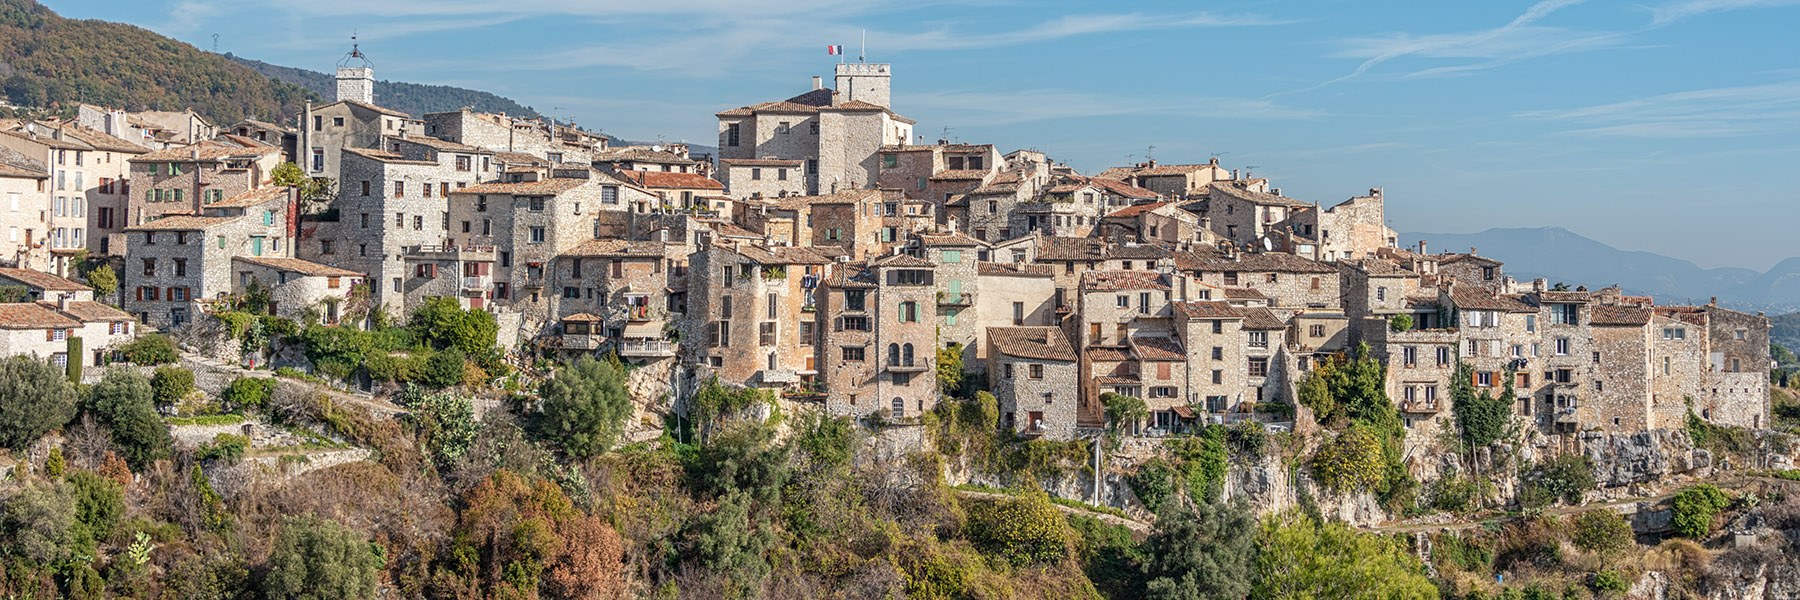 The best view of the old village is from the D2210 that runs between Châteauneuf-de-Grasse and Vence